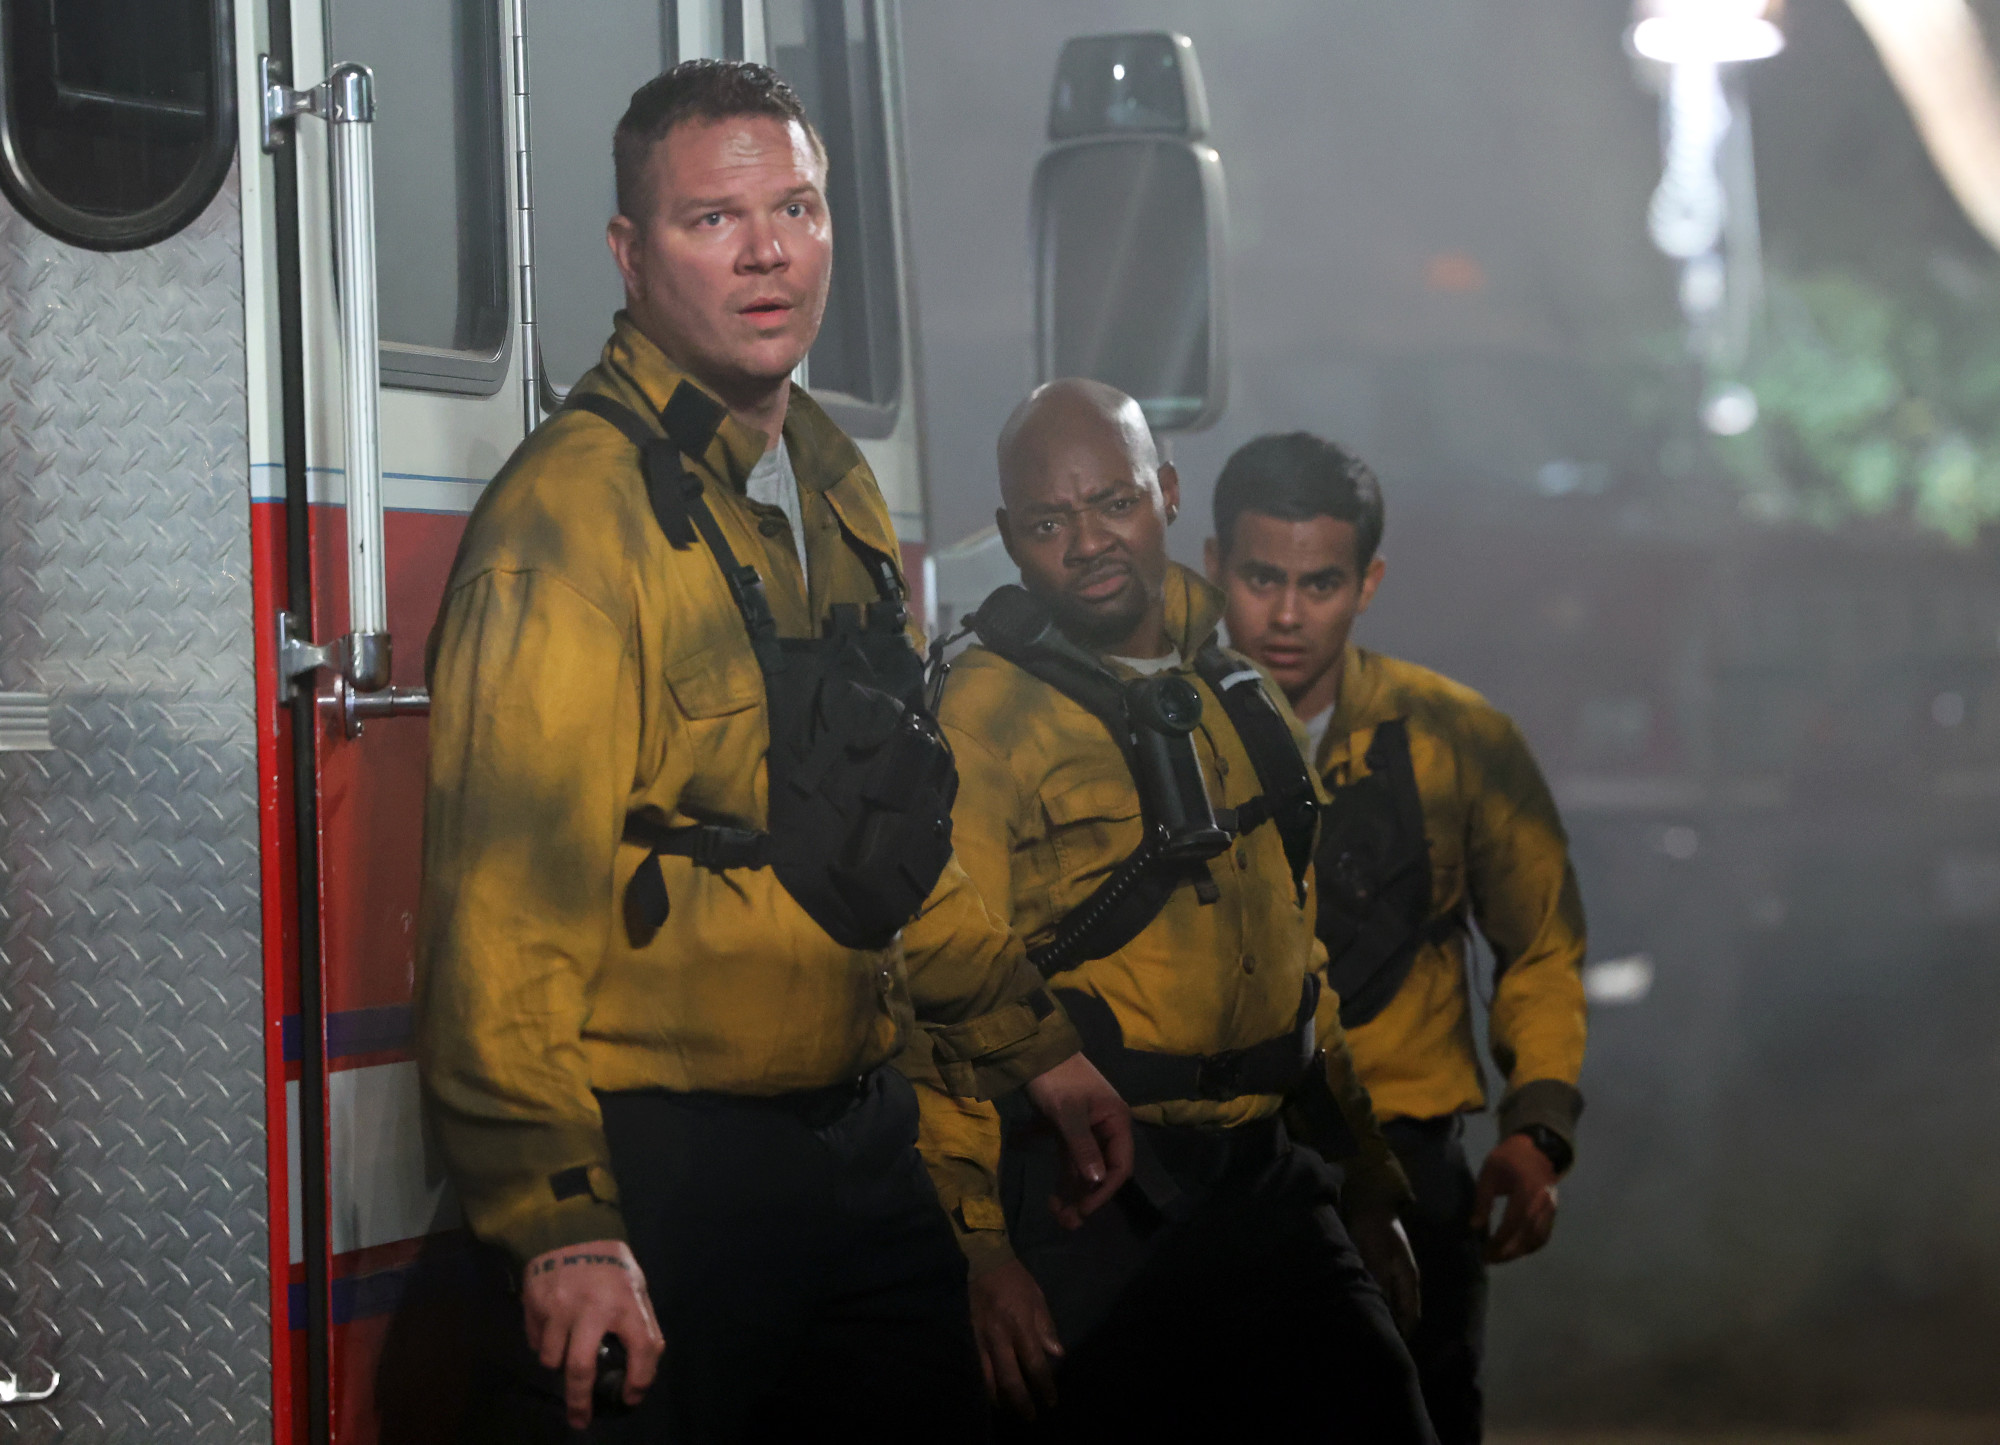 9-1-1: LONE STAR: L-R: Jim Parrack, Brian Michael Smith and Julian Works in the “Hold The Line” episode of 9-1-1: LONE STAR airing Monday, Feb. 1 (9:01-10:00 PM ET/PT) on FOX. © 2021 Fox Media LLC. CR: Jordin Althaus/FOX.